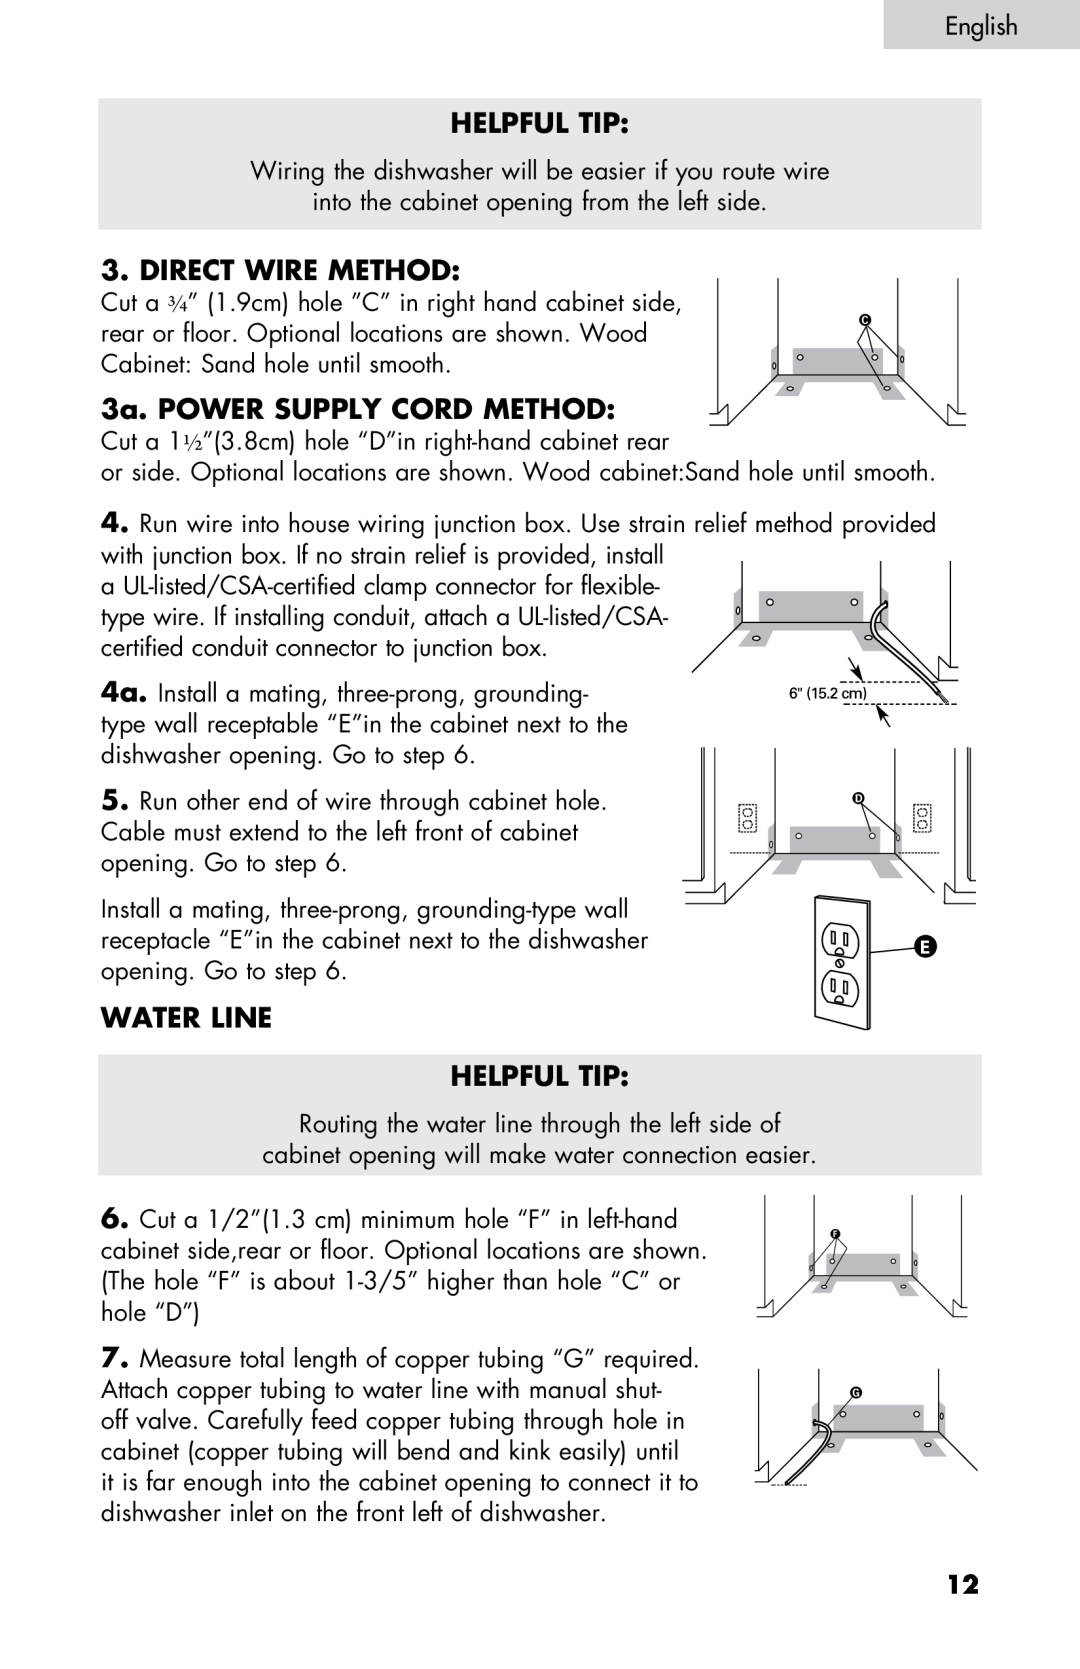 Haier DW-7777-01 manual Helpful Tip, Direct wire method, 3a. Power supply cord method, Water line HELPFUL TIP 